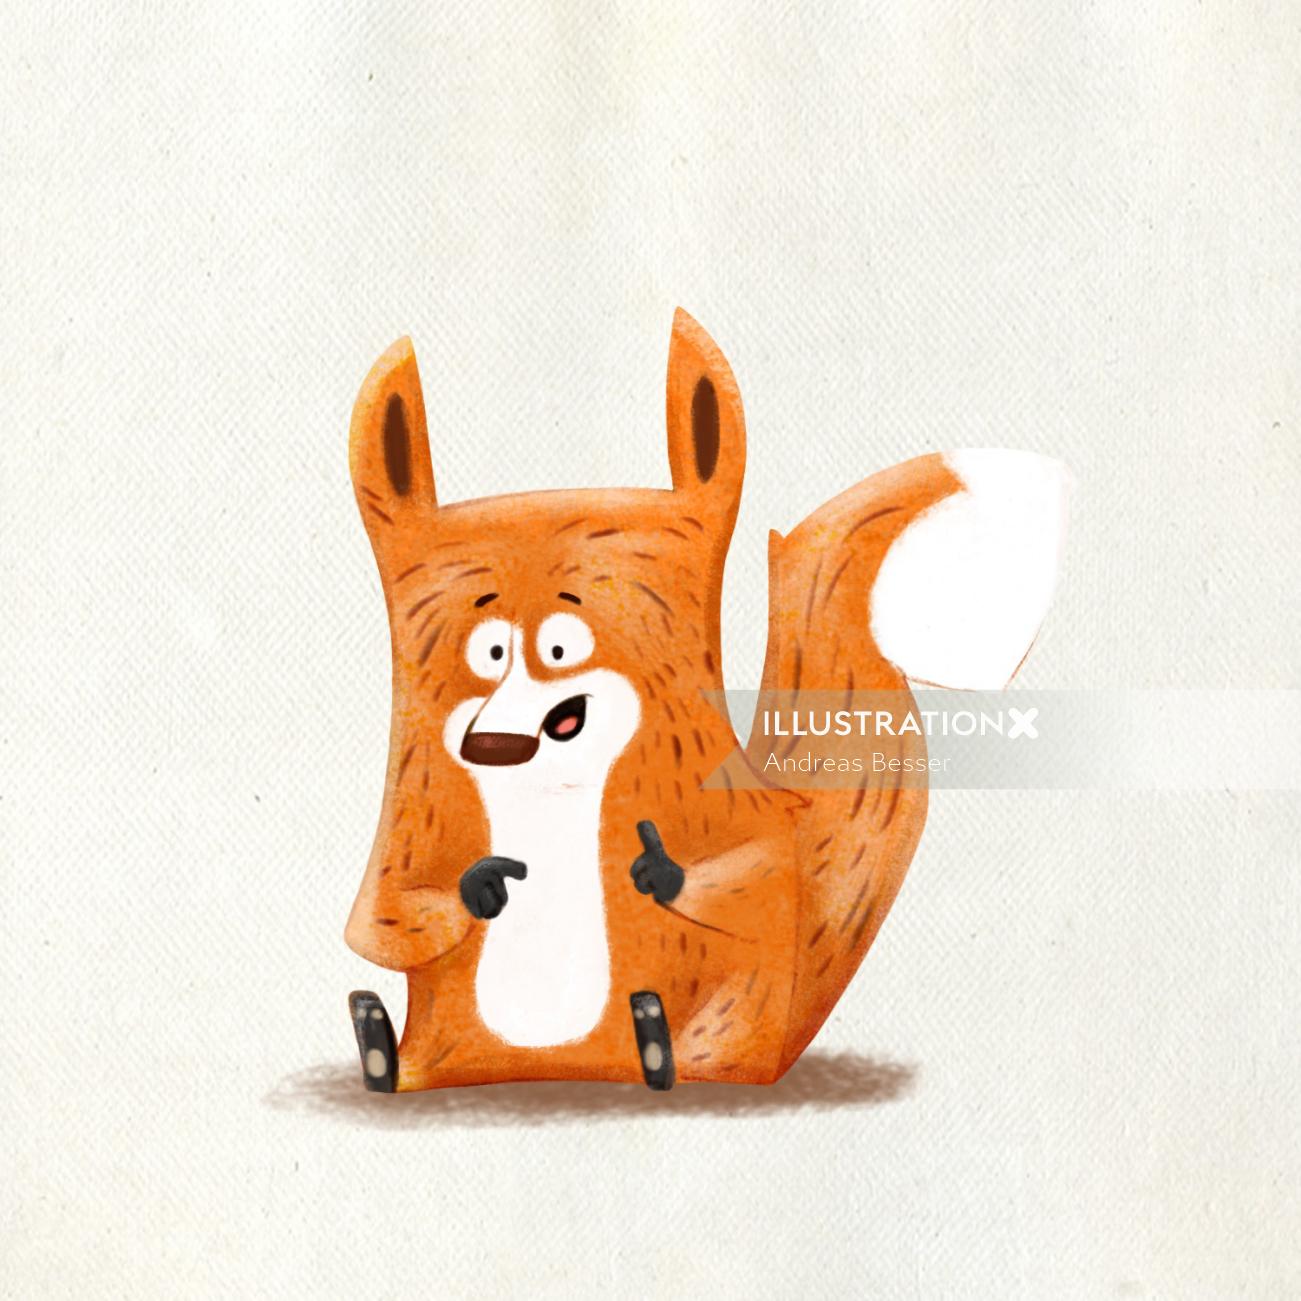 character illustration of an scared animal
